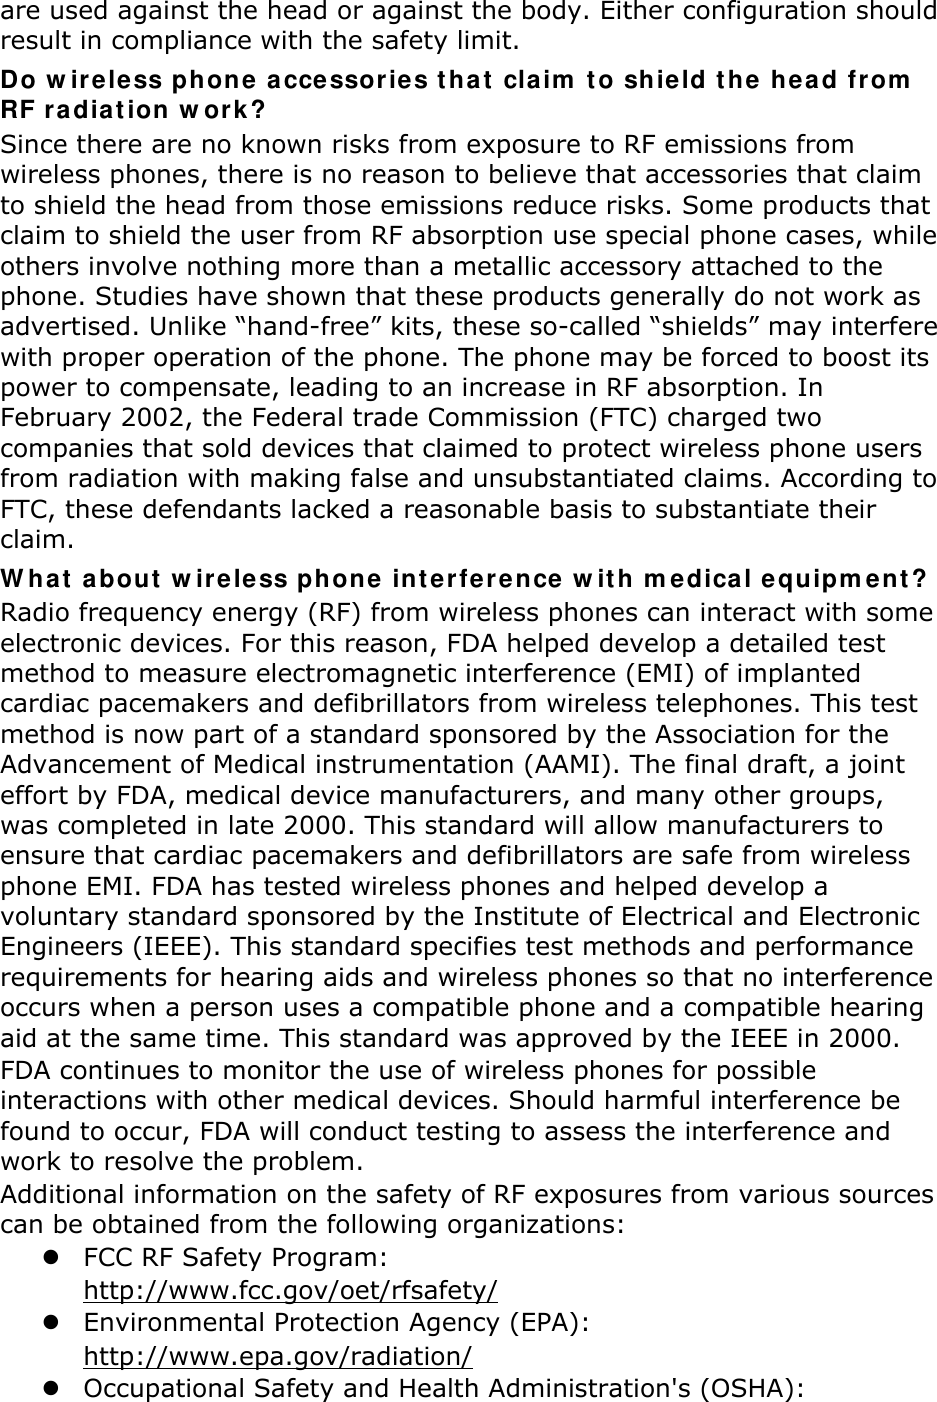 are used against the head or against the body. Either configuration should result in compliance with the safety limit. Do wireless phone accessories that claim to shield the head from RF radiation work? Since there are no known risks from exposure to RF emissions from wireless phones, there is no reason to believe that accessories that claim to shield the head from those emissions reduce risks. Some products that claim to shield the user from RF absorption use special phone cases, while others involve nothing more than a metallic accessory attached to the phone. Studies have shown that these products generally do not work as advertised. Unlike “hand-free” kits, these so-called “shields” may interfere with proper operation of the phone. The phone may be forced to boost its power to compensate, leading to an increase in RF absorption. In February 2002, the Federal trade Commission (FTC) charged two companies that sold devices that claimed to protect wireless phone users from radiation with making false and unsubstantiated claims. According to FTC, these defendants lacked a reasonable basis to substantiate their claim. What about wireless phone interference with medical equipment? Radio frequency energy (RF) from wireless phones can interact with some electronic devices. For this reason, FDA helped develop a detailed test method to measure electromagnetic interference (EMI) of implanted cardiac pacemakers and defibrillators from wireless telephones. This test method is now part of a standard sponsored by the Association for the Advancement of Medical instrumentation (AAMI). The final draft, a joint effort by FDA, medical device manufacturers, and many other groups, was completed in late 2000. This standard will allow manufacturers to ensure that cardiac pacemakers and defibrillators are safe from wireless phone EMI. FDA has tested wireless phones and helped develop a voluntary standard sponsored by the Institute of Electrical and Electronic Engineers (IEEE). This standard specifies test methods and performance requirements for hearing aids and wireless phones so that no interference occurs when a person uses a compatible phone and a compatible hearing aid at the same time. This standard was approved by the IEEE in 2000. FDA continues to monitor the use of wireless phones for possible interactions with other medical devices. Should harmful interference be found to occur, FDA will conduct testing to assess the interference and work to resolve the problem. Additional information on the safety of RF exposures from various sources can be obtained from the following organizations: z FCC RF Safety Program:  http://www.fcc.gov/oet/rfsafety/ z Environmental Protection Agency (EPA):  http://www.epa.gov/radiation/ z Occupational Safety and Health Administration&apos;s (OSHA):   